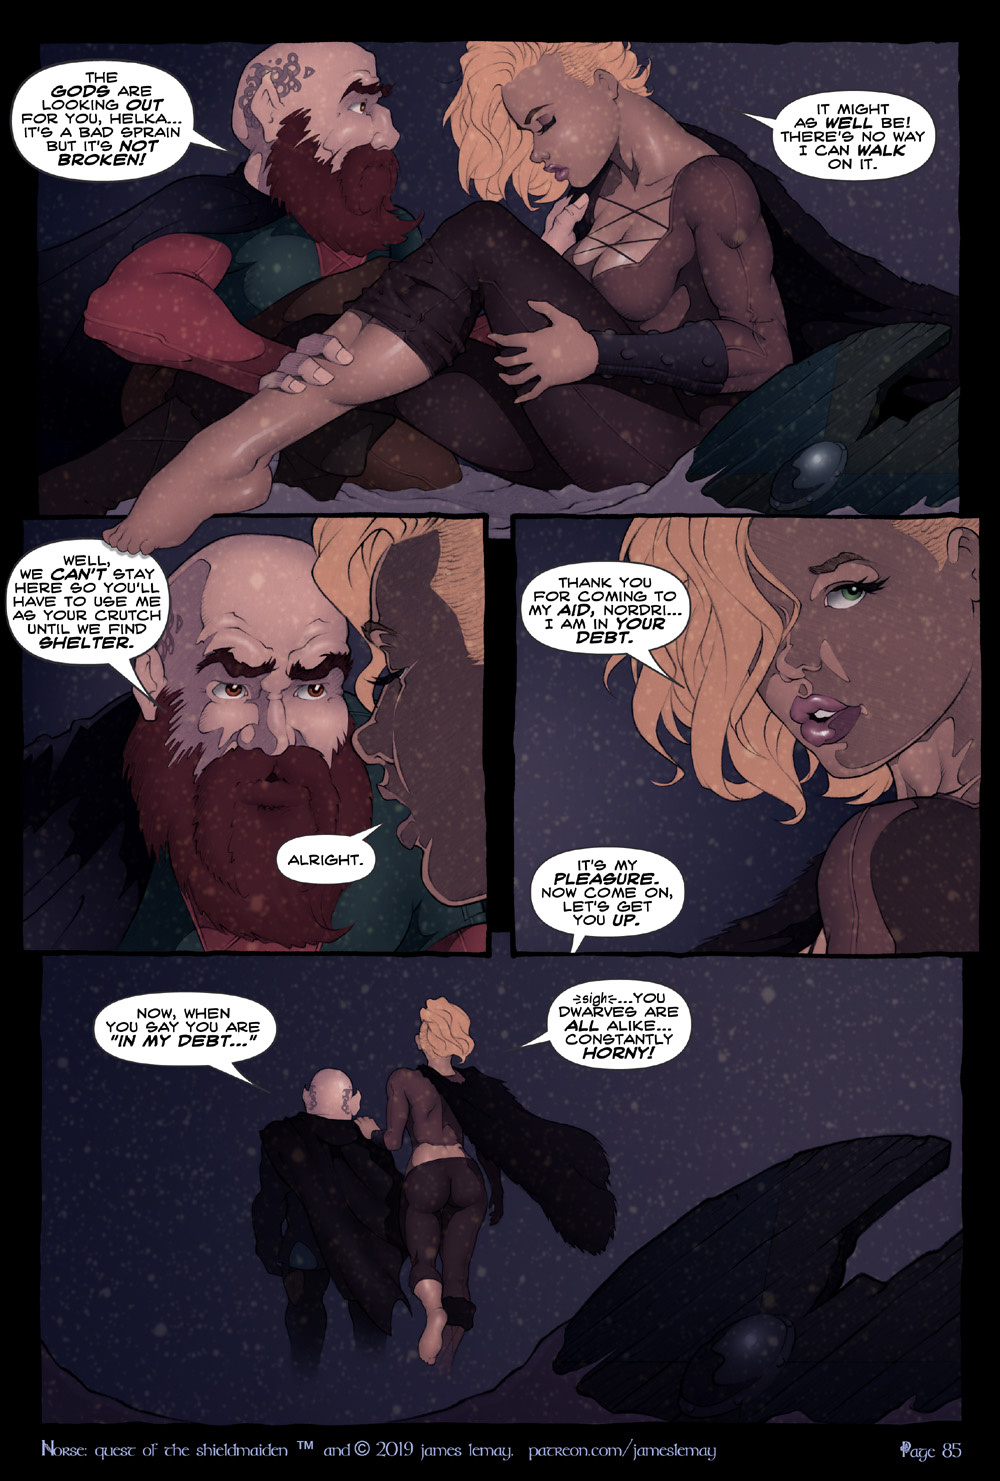 Norse - Quest of the Shield Maiden porn comics Oral sex, Anal Sex, Bestiality, Big Tits, Group Sex, Lesbians, Stockings, Titfuck